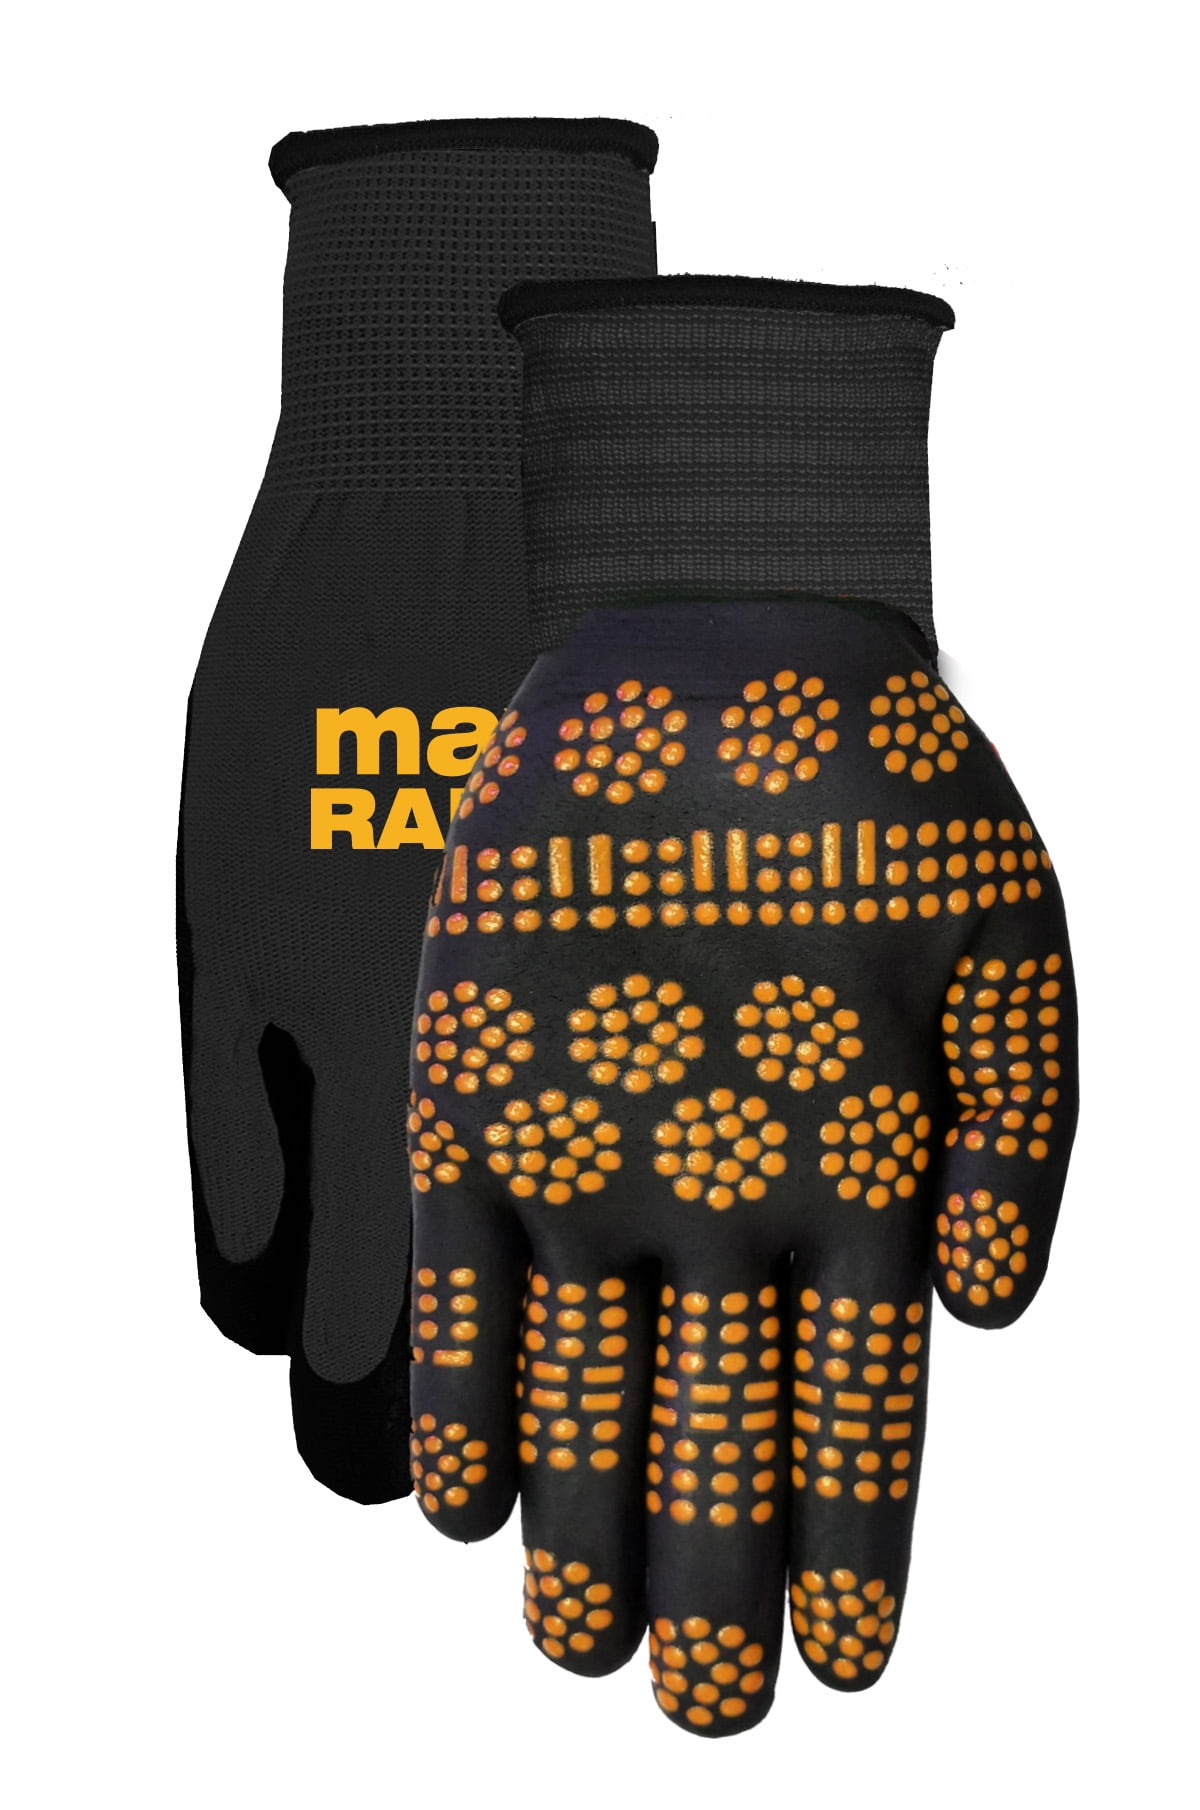 MidWest Gloves & Gear, Unisex, 6 Pack of Radial Max Grip™ Gloves, Black and  Yellow, Size SM